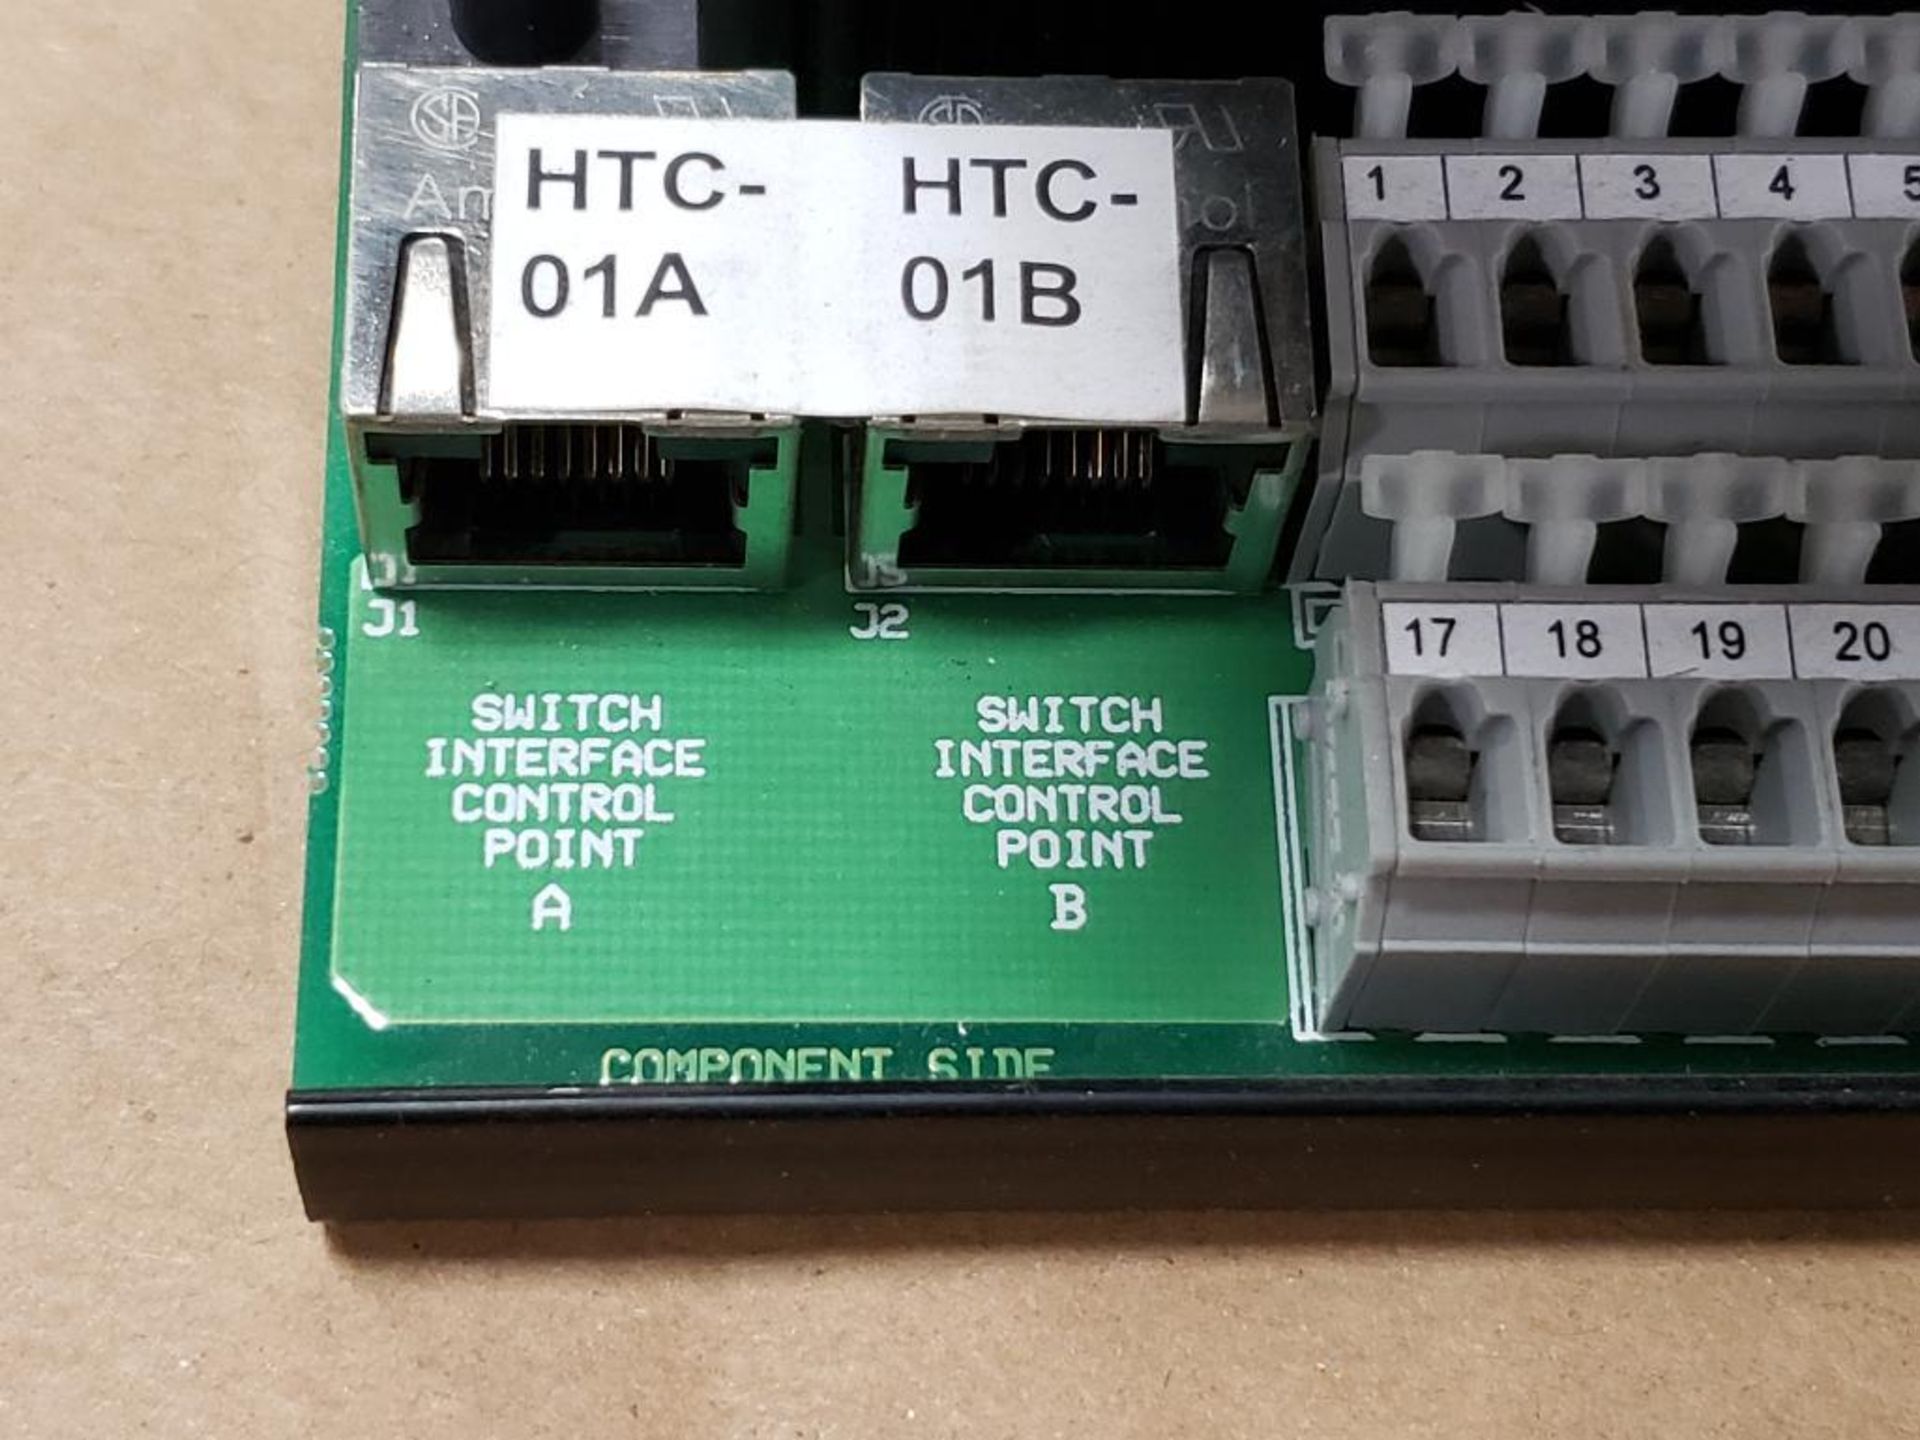 Tyco Thermal Controls 920HTC DigiTrace 920 series programmable dual point heat-tracing controller. - Image 3 of 6